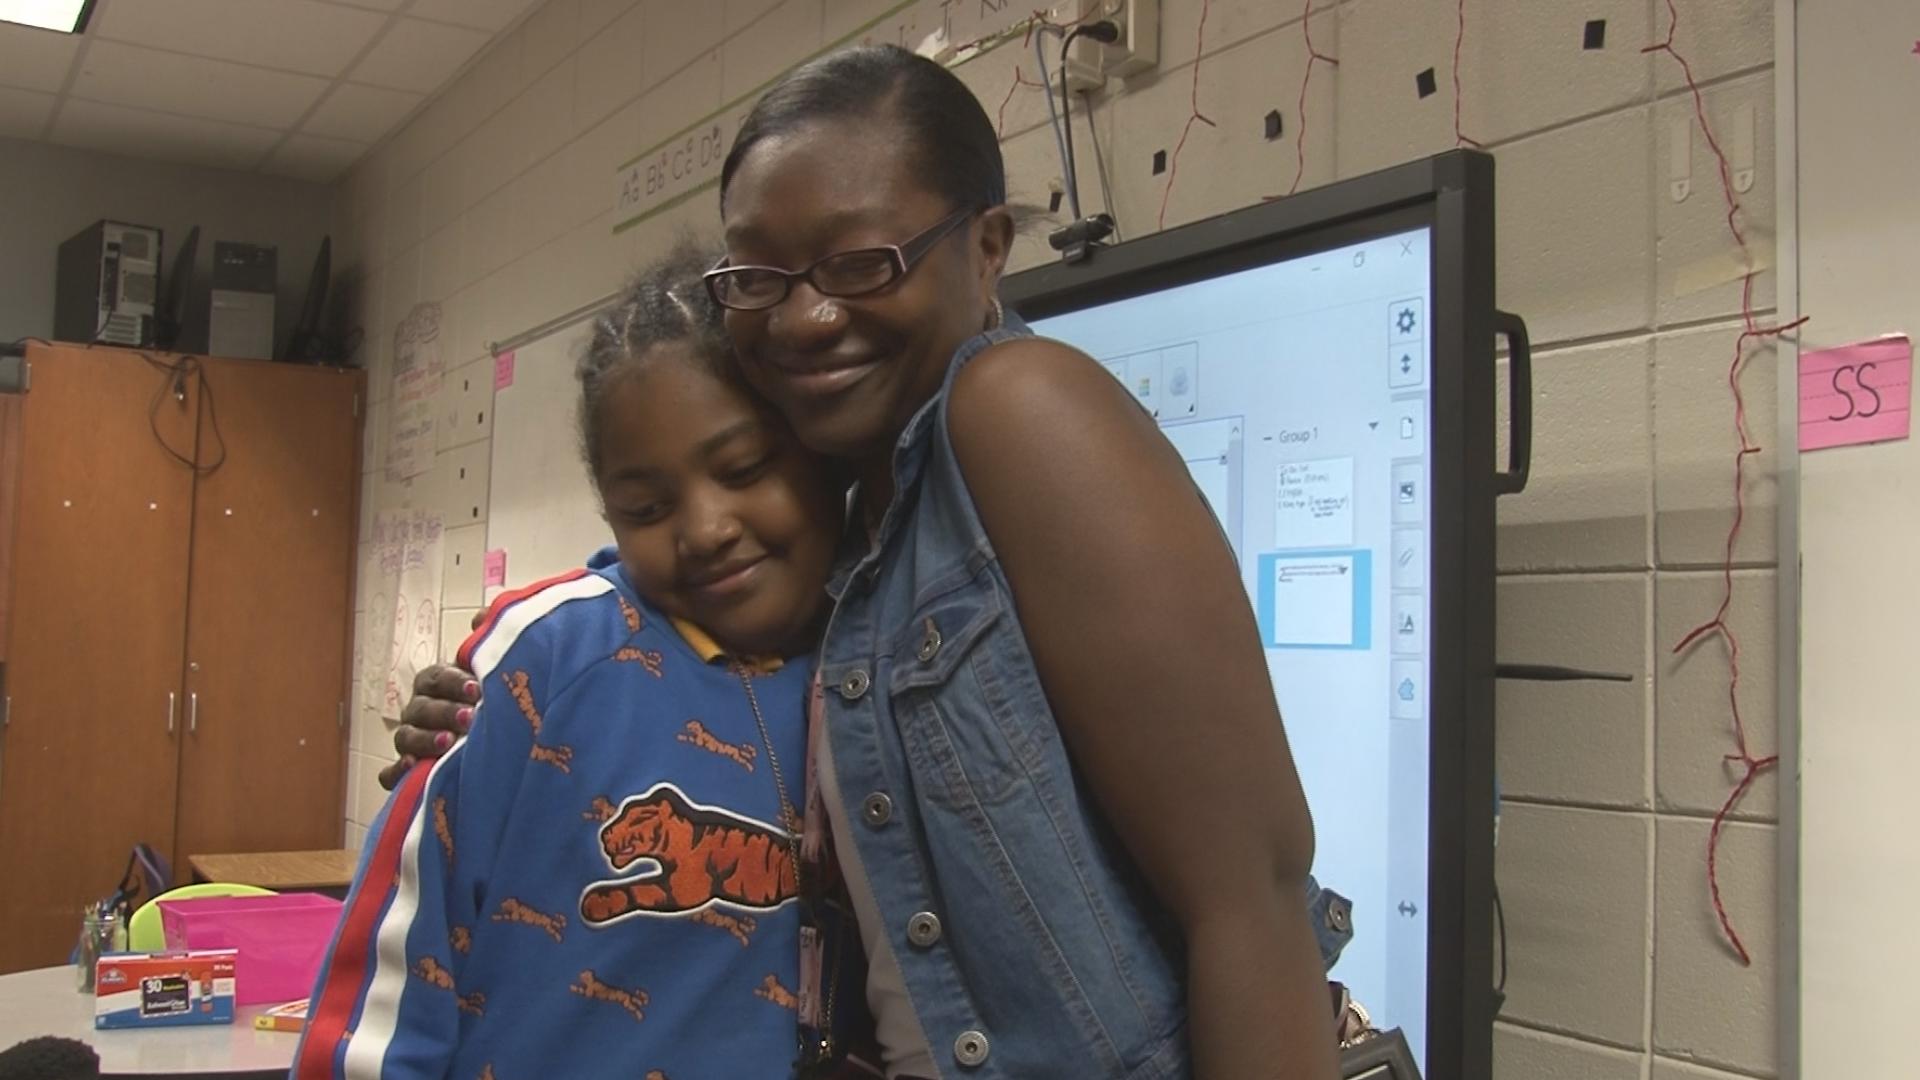 Her last name may have changed but her impact on third-grade students has stayed the same.